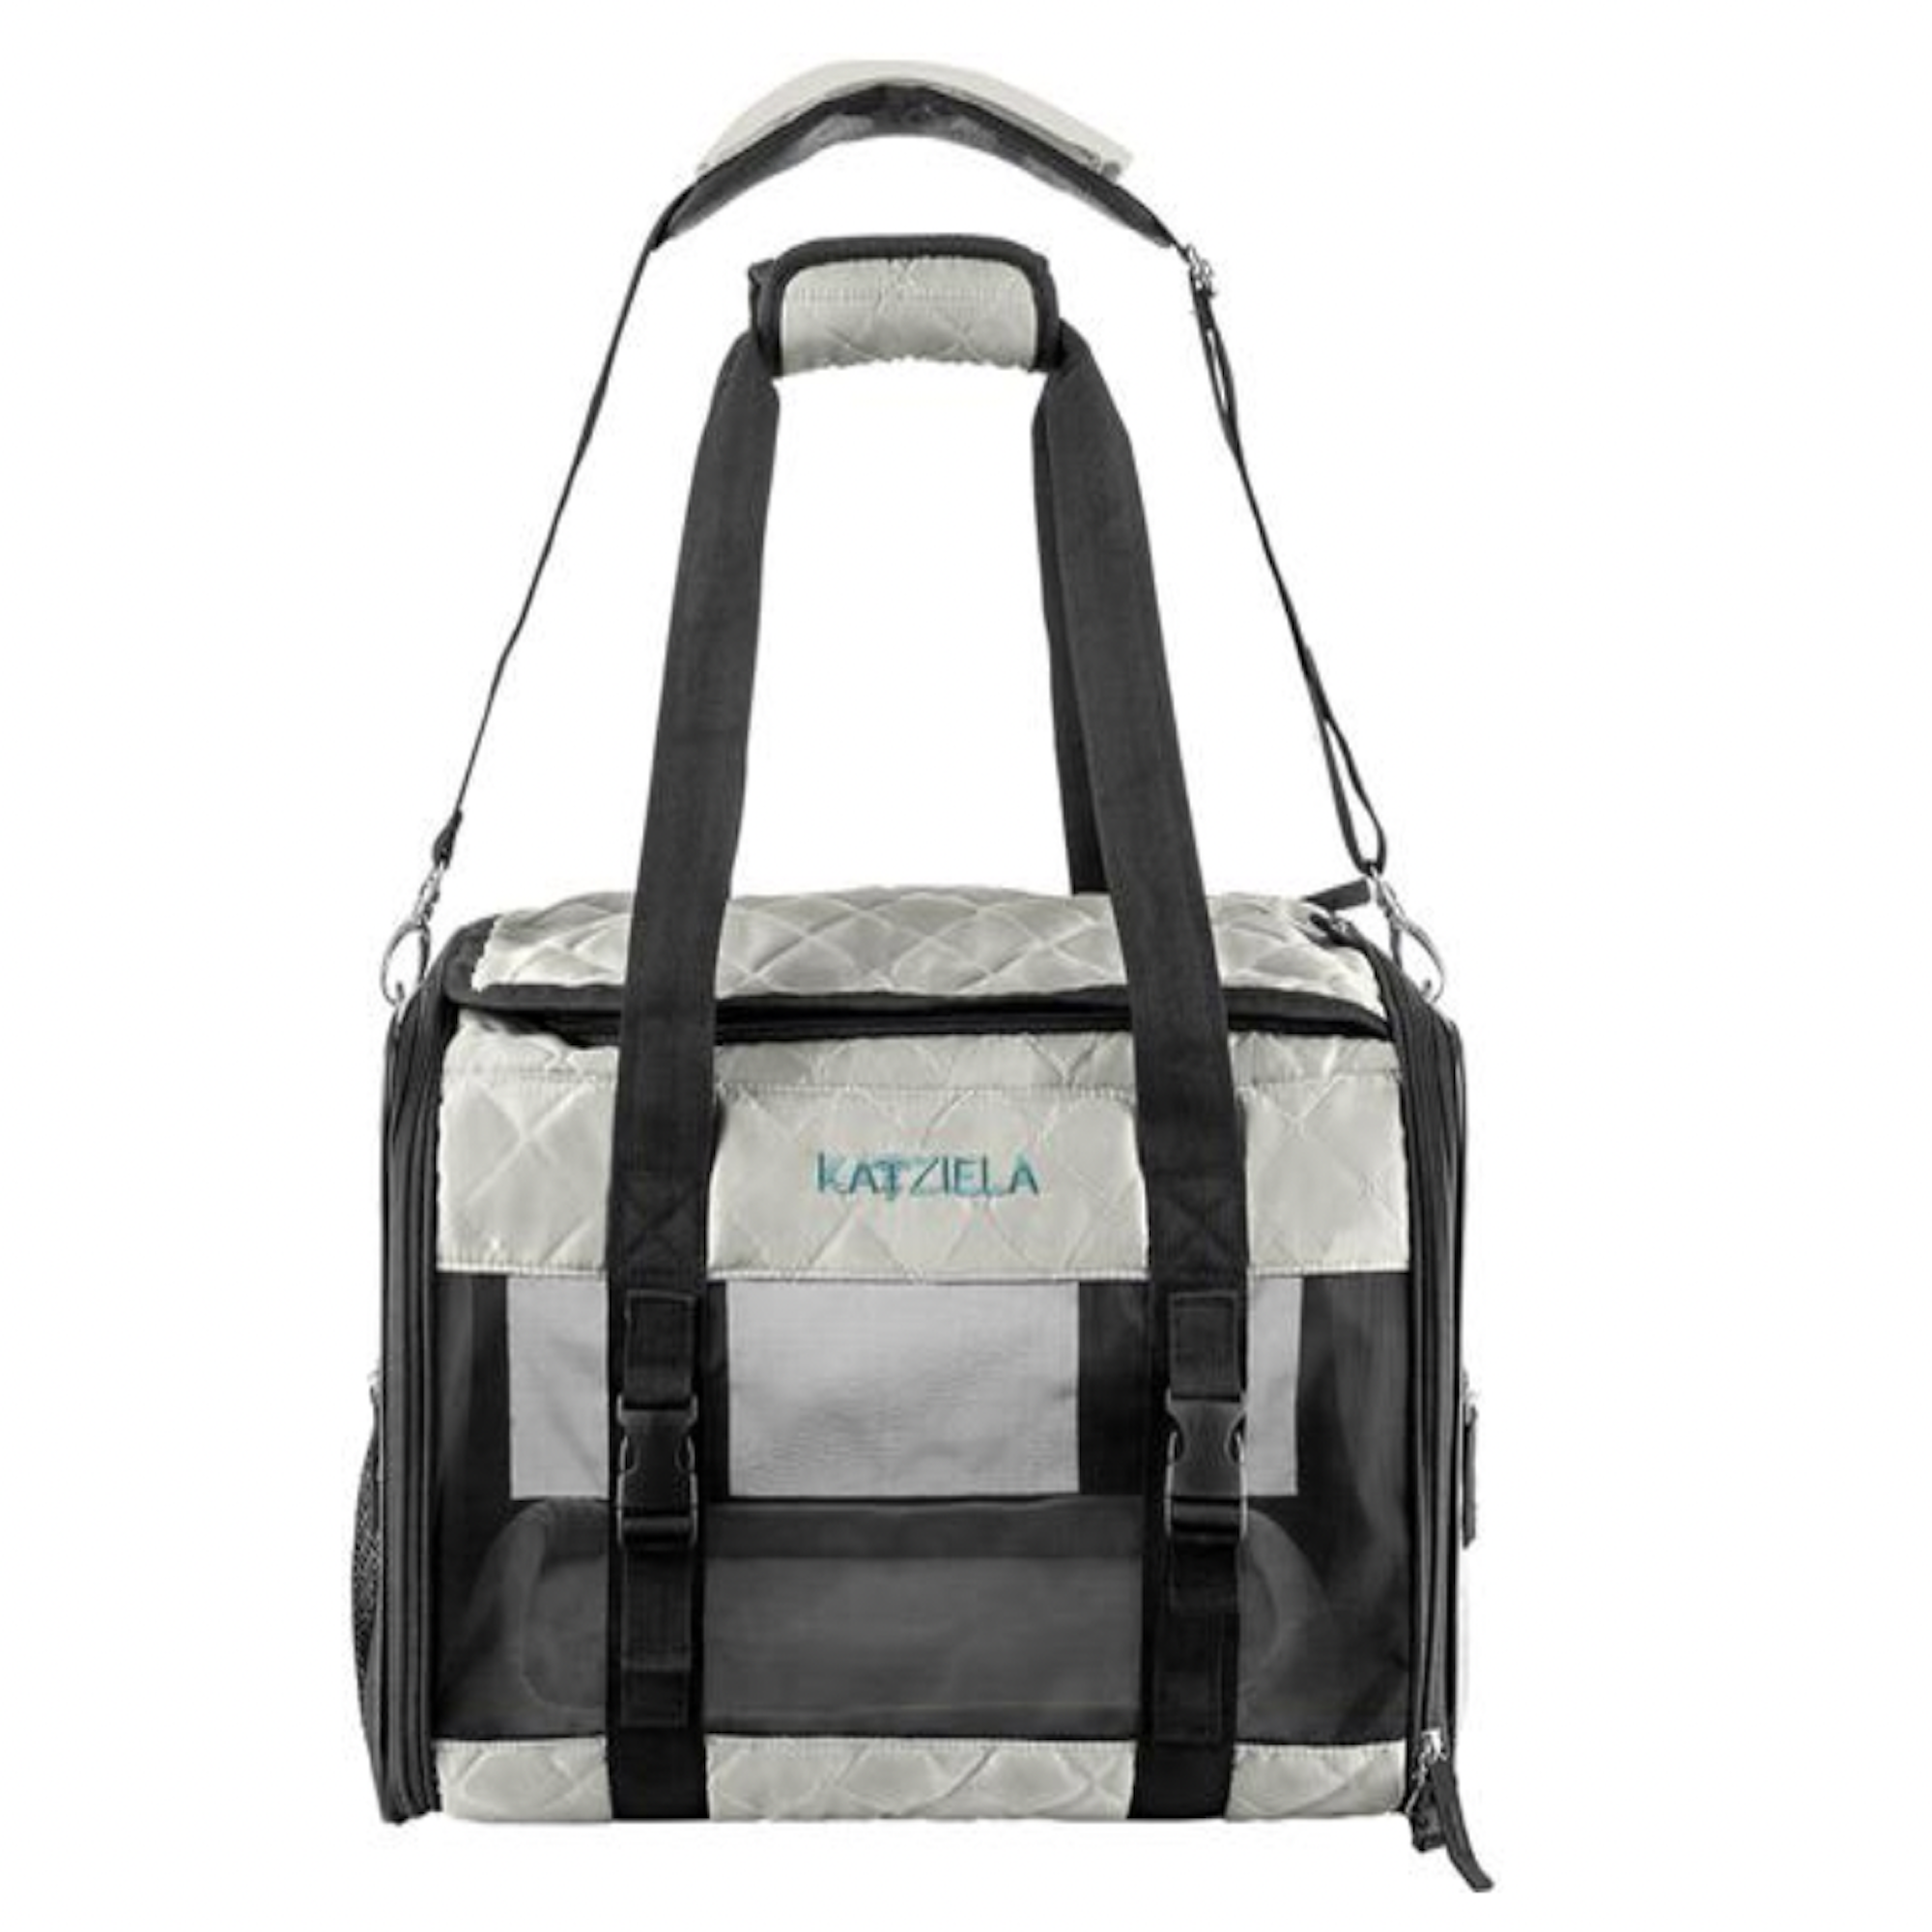 Katziela Quilted Companion Pet Carrier - Gray